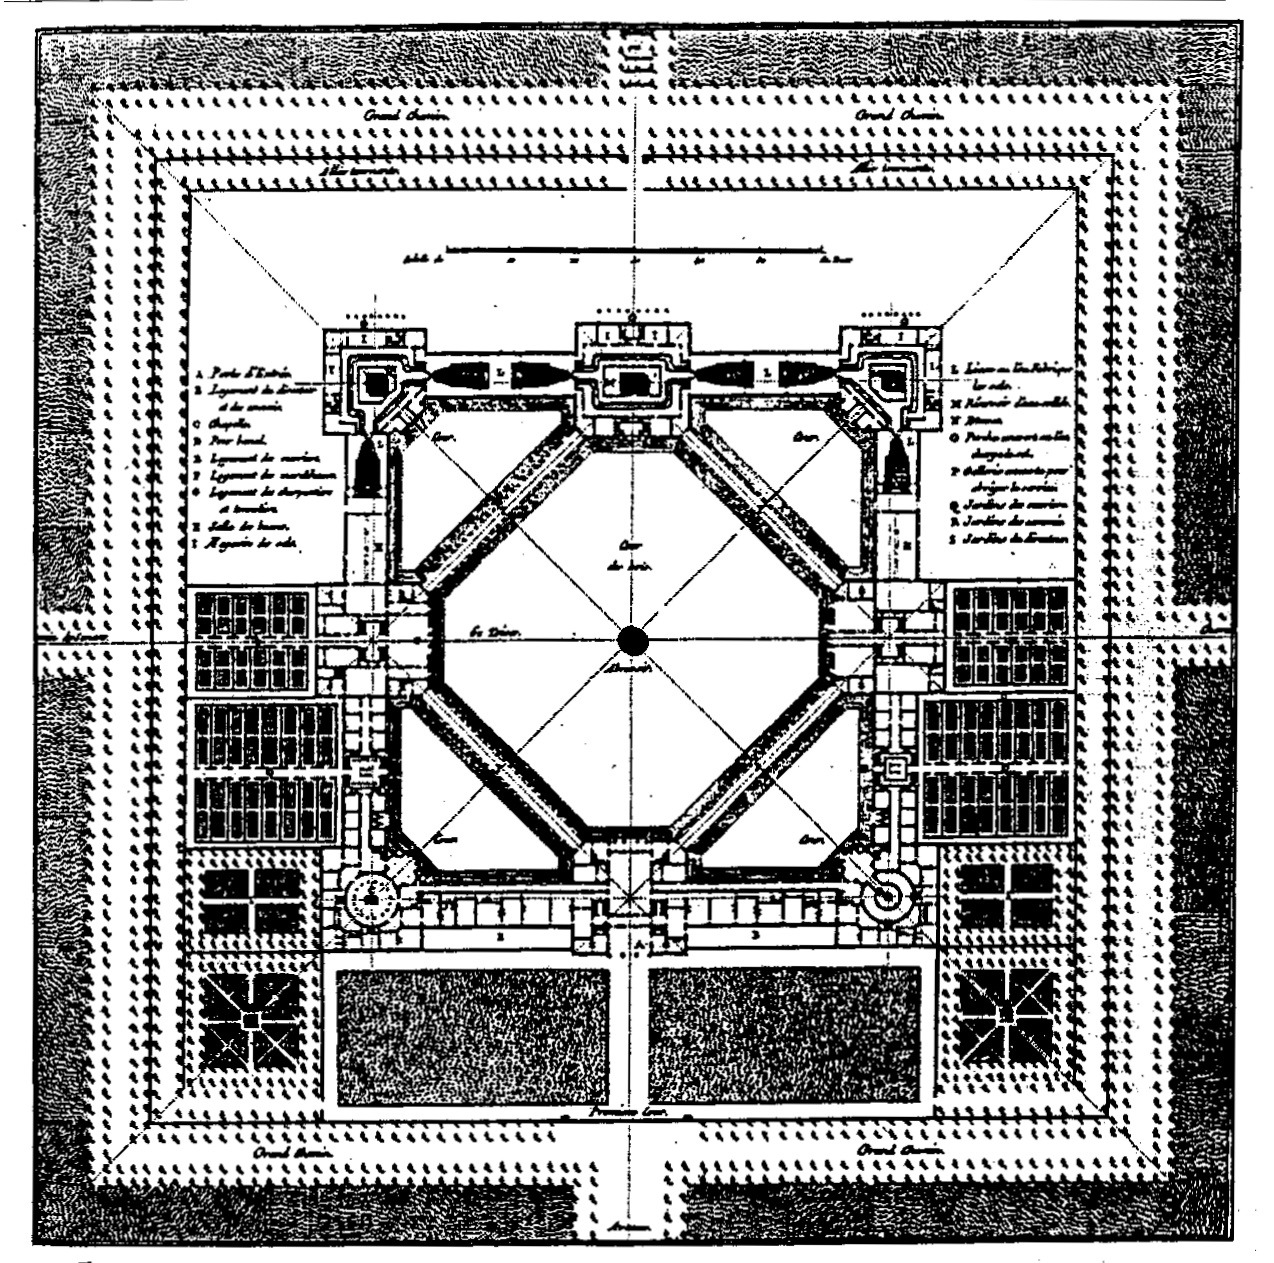 Ledoux’s first design for the salt works, Chaux